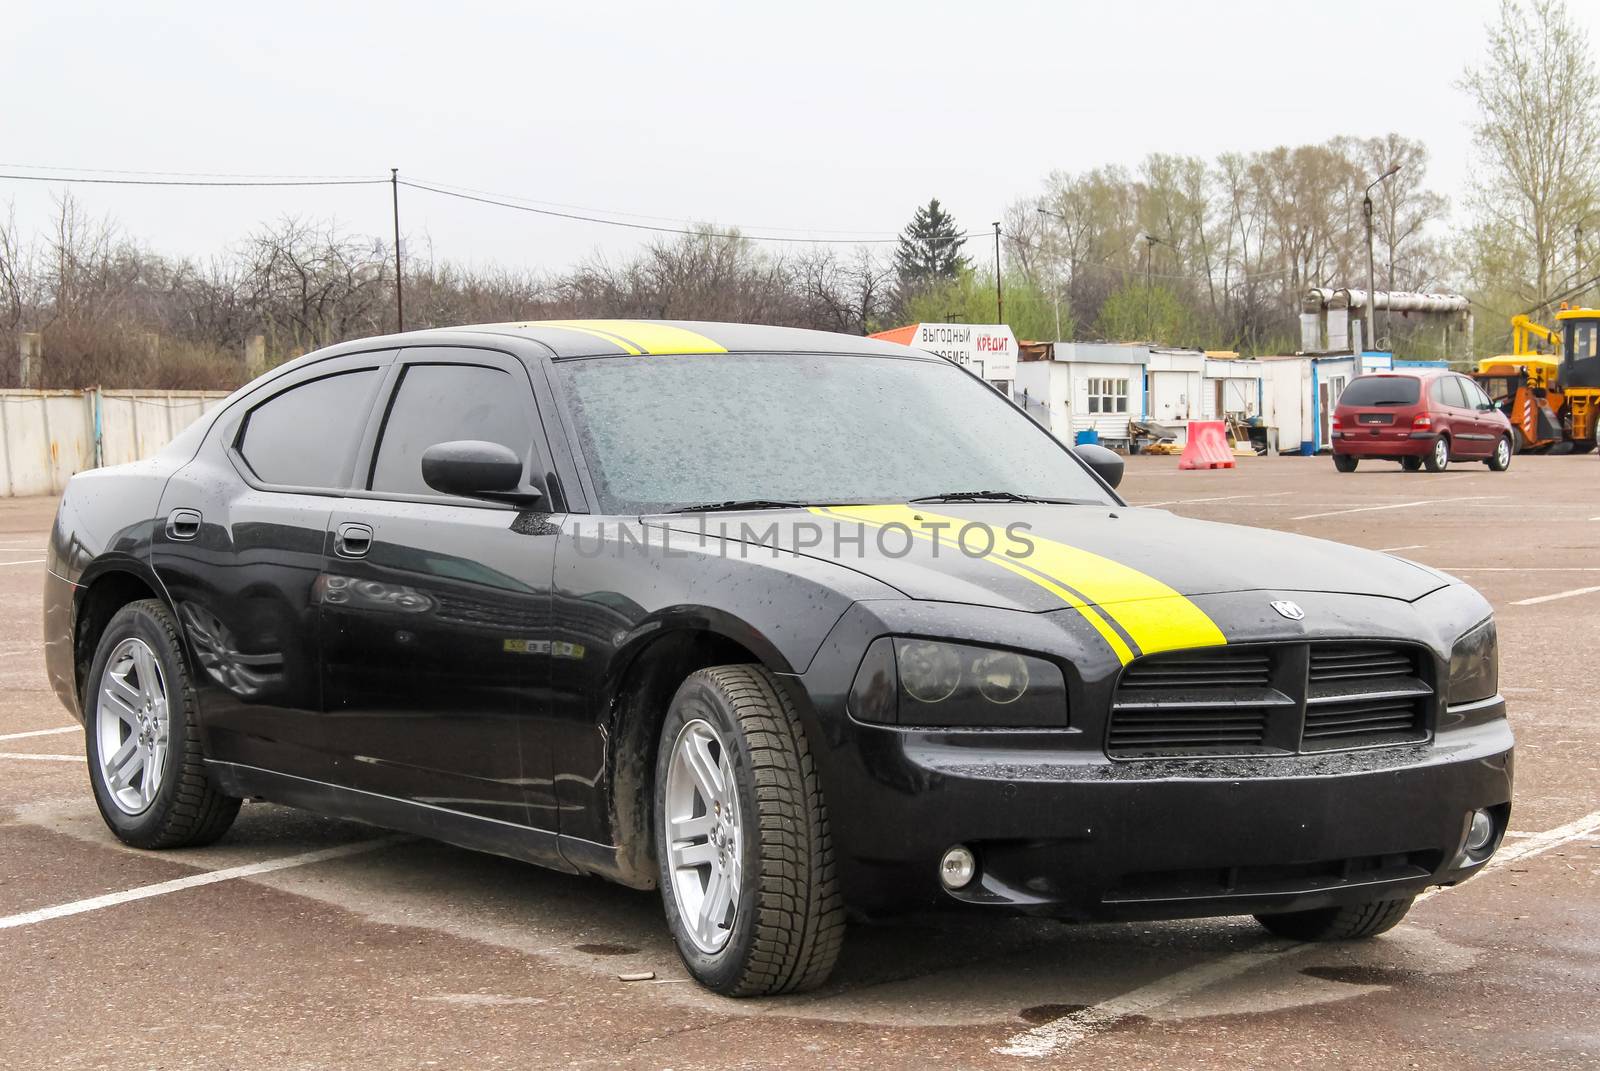 UFA, RUSSIA - APRIL 19, 2012: Motor car Dodge Charger at the used cars trade center.